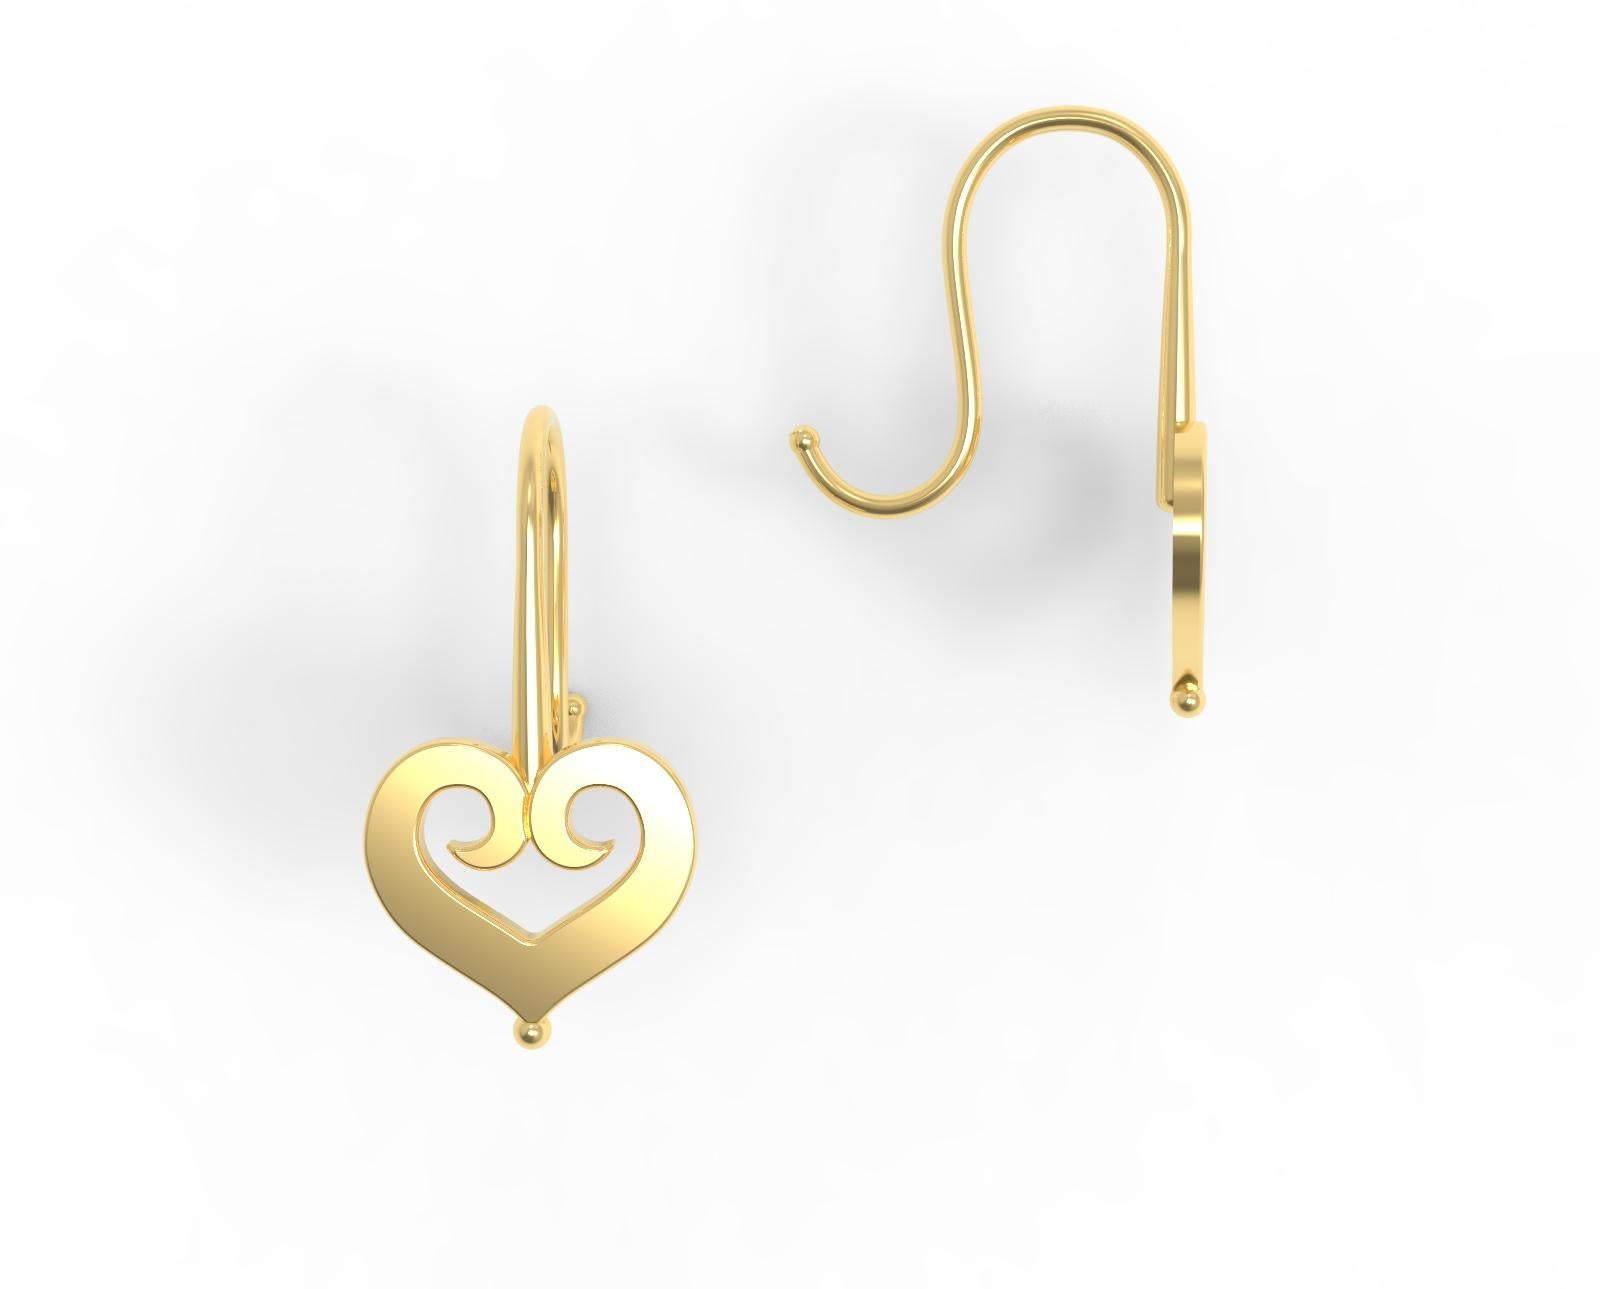 18K Gold Earrings with Heart Motif by ROMAE Jewelry - Inspired by an Ancient Roman Example. Our darling 